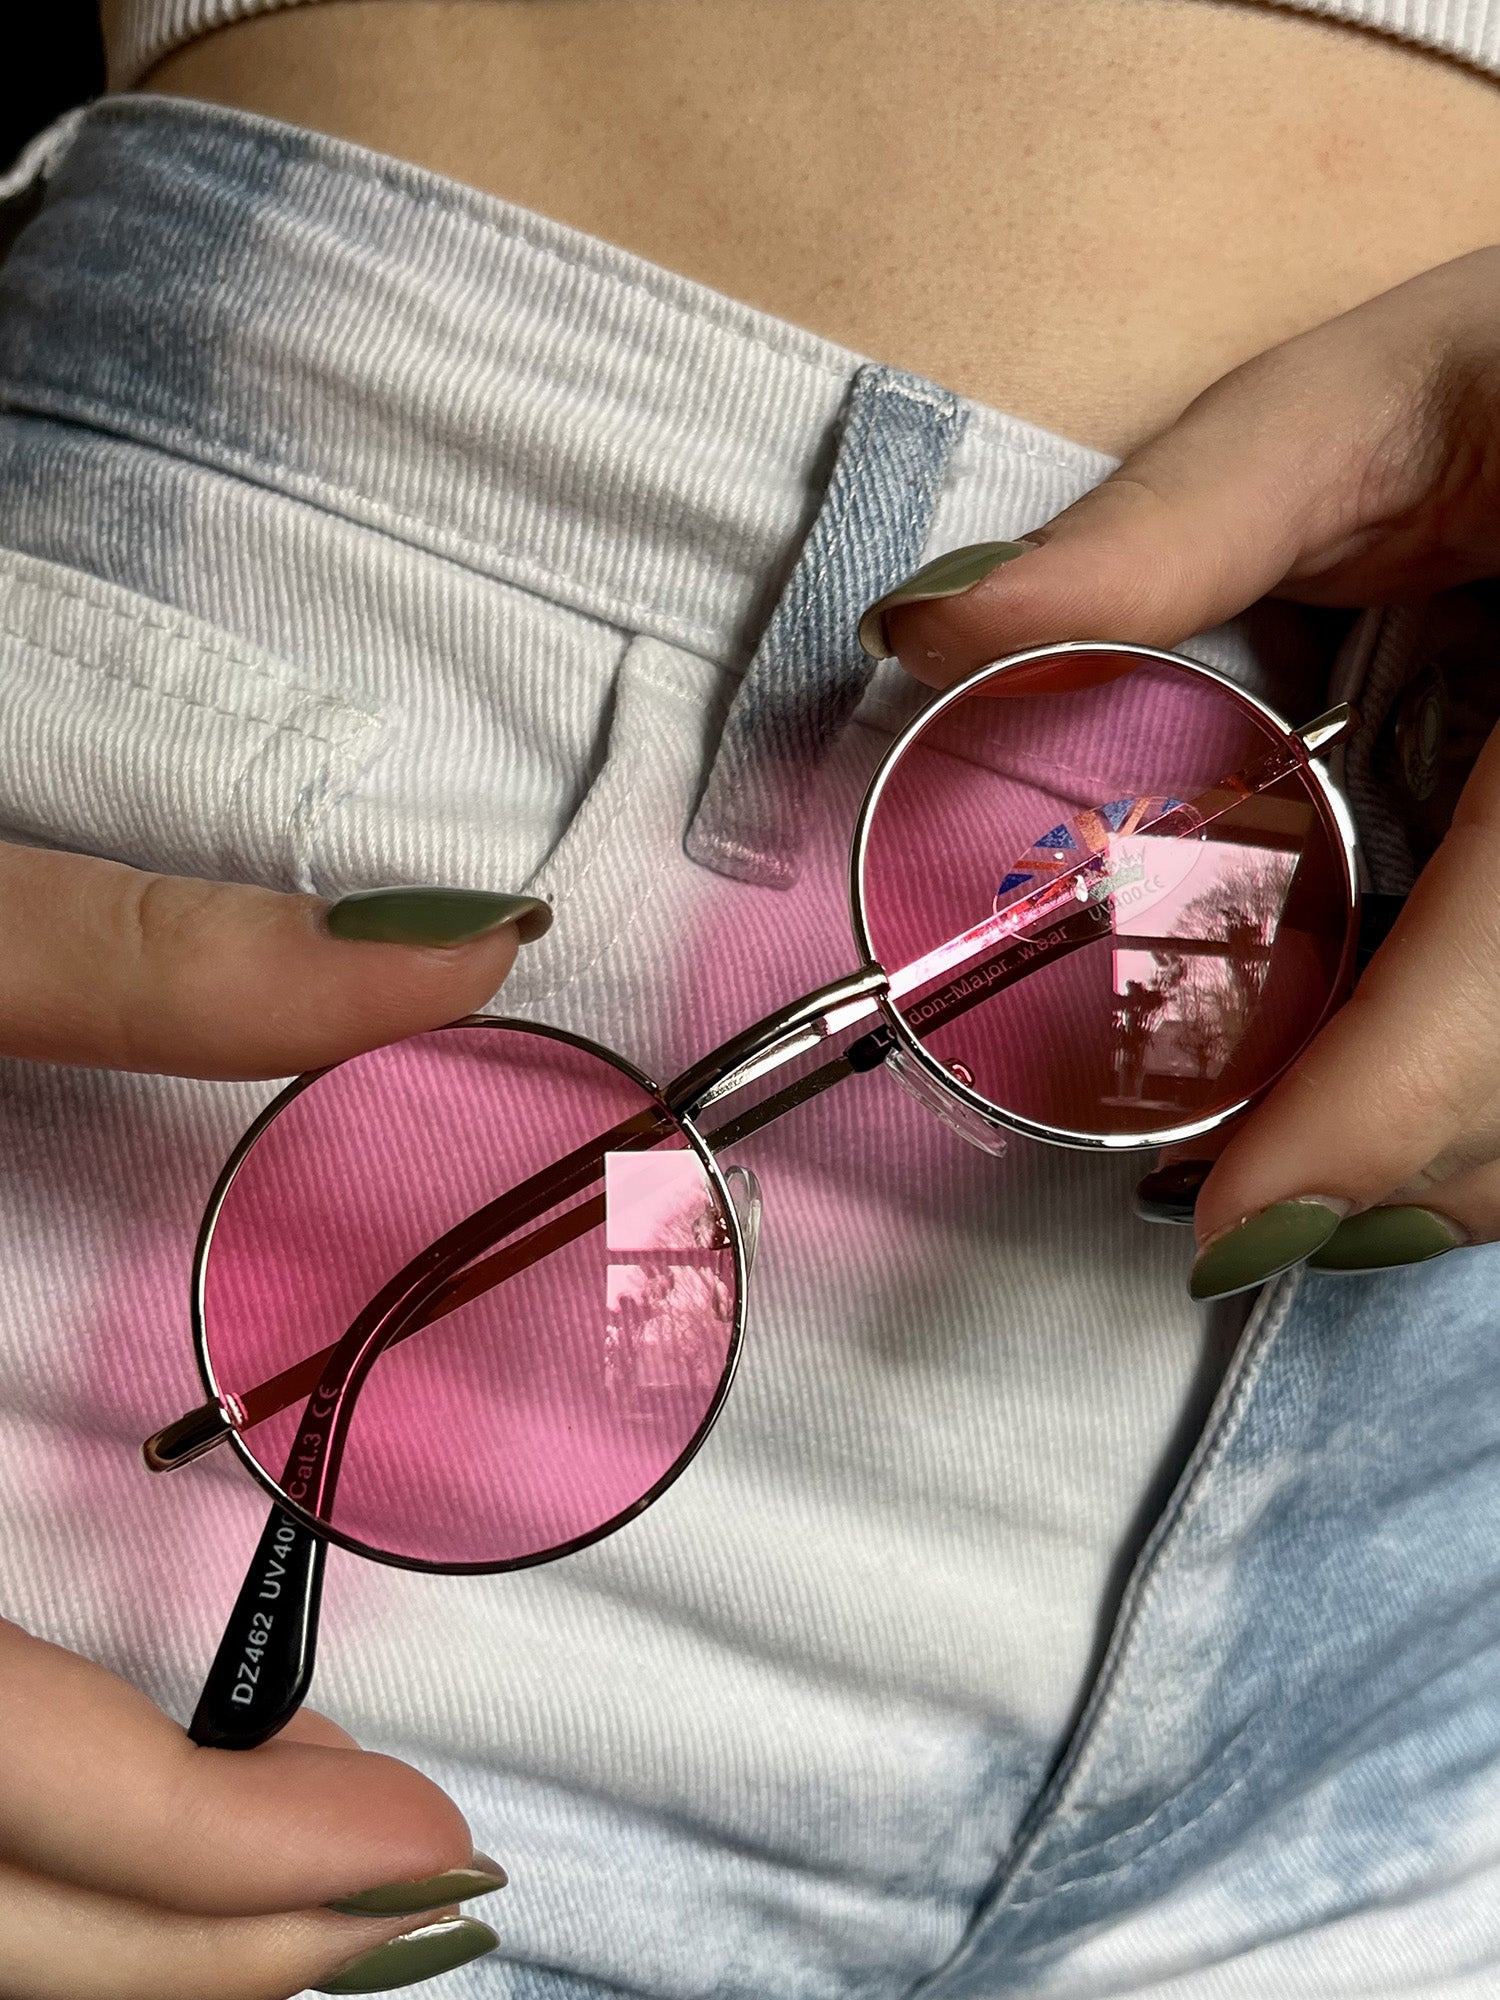 Pink Small Round Lens Sunglasses